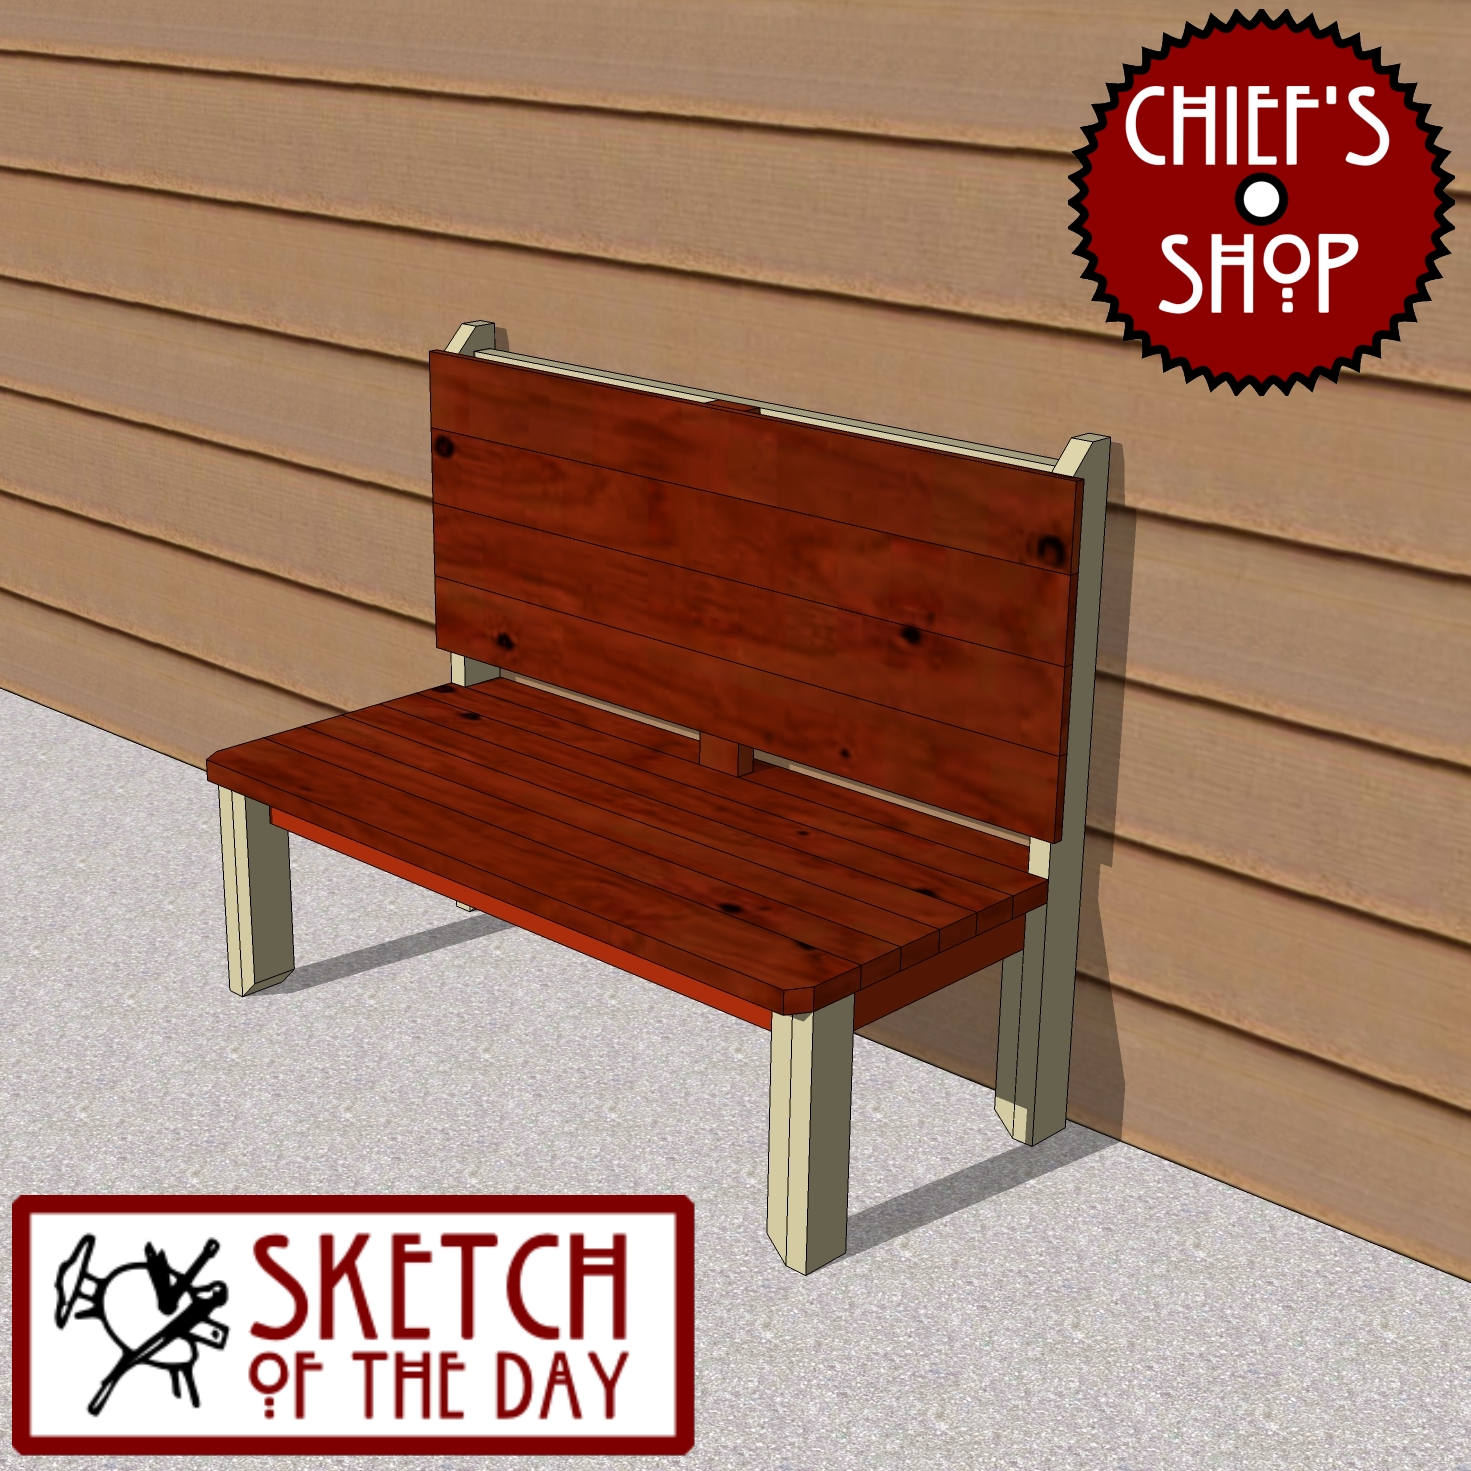 Chief's Shop | Woodworking Education & Craftsmanship